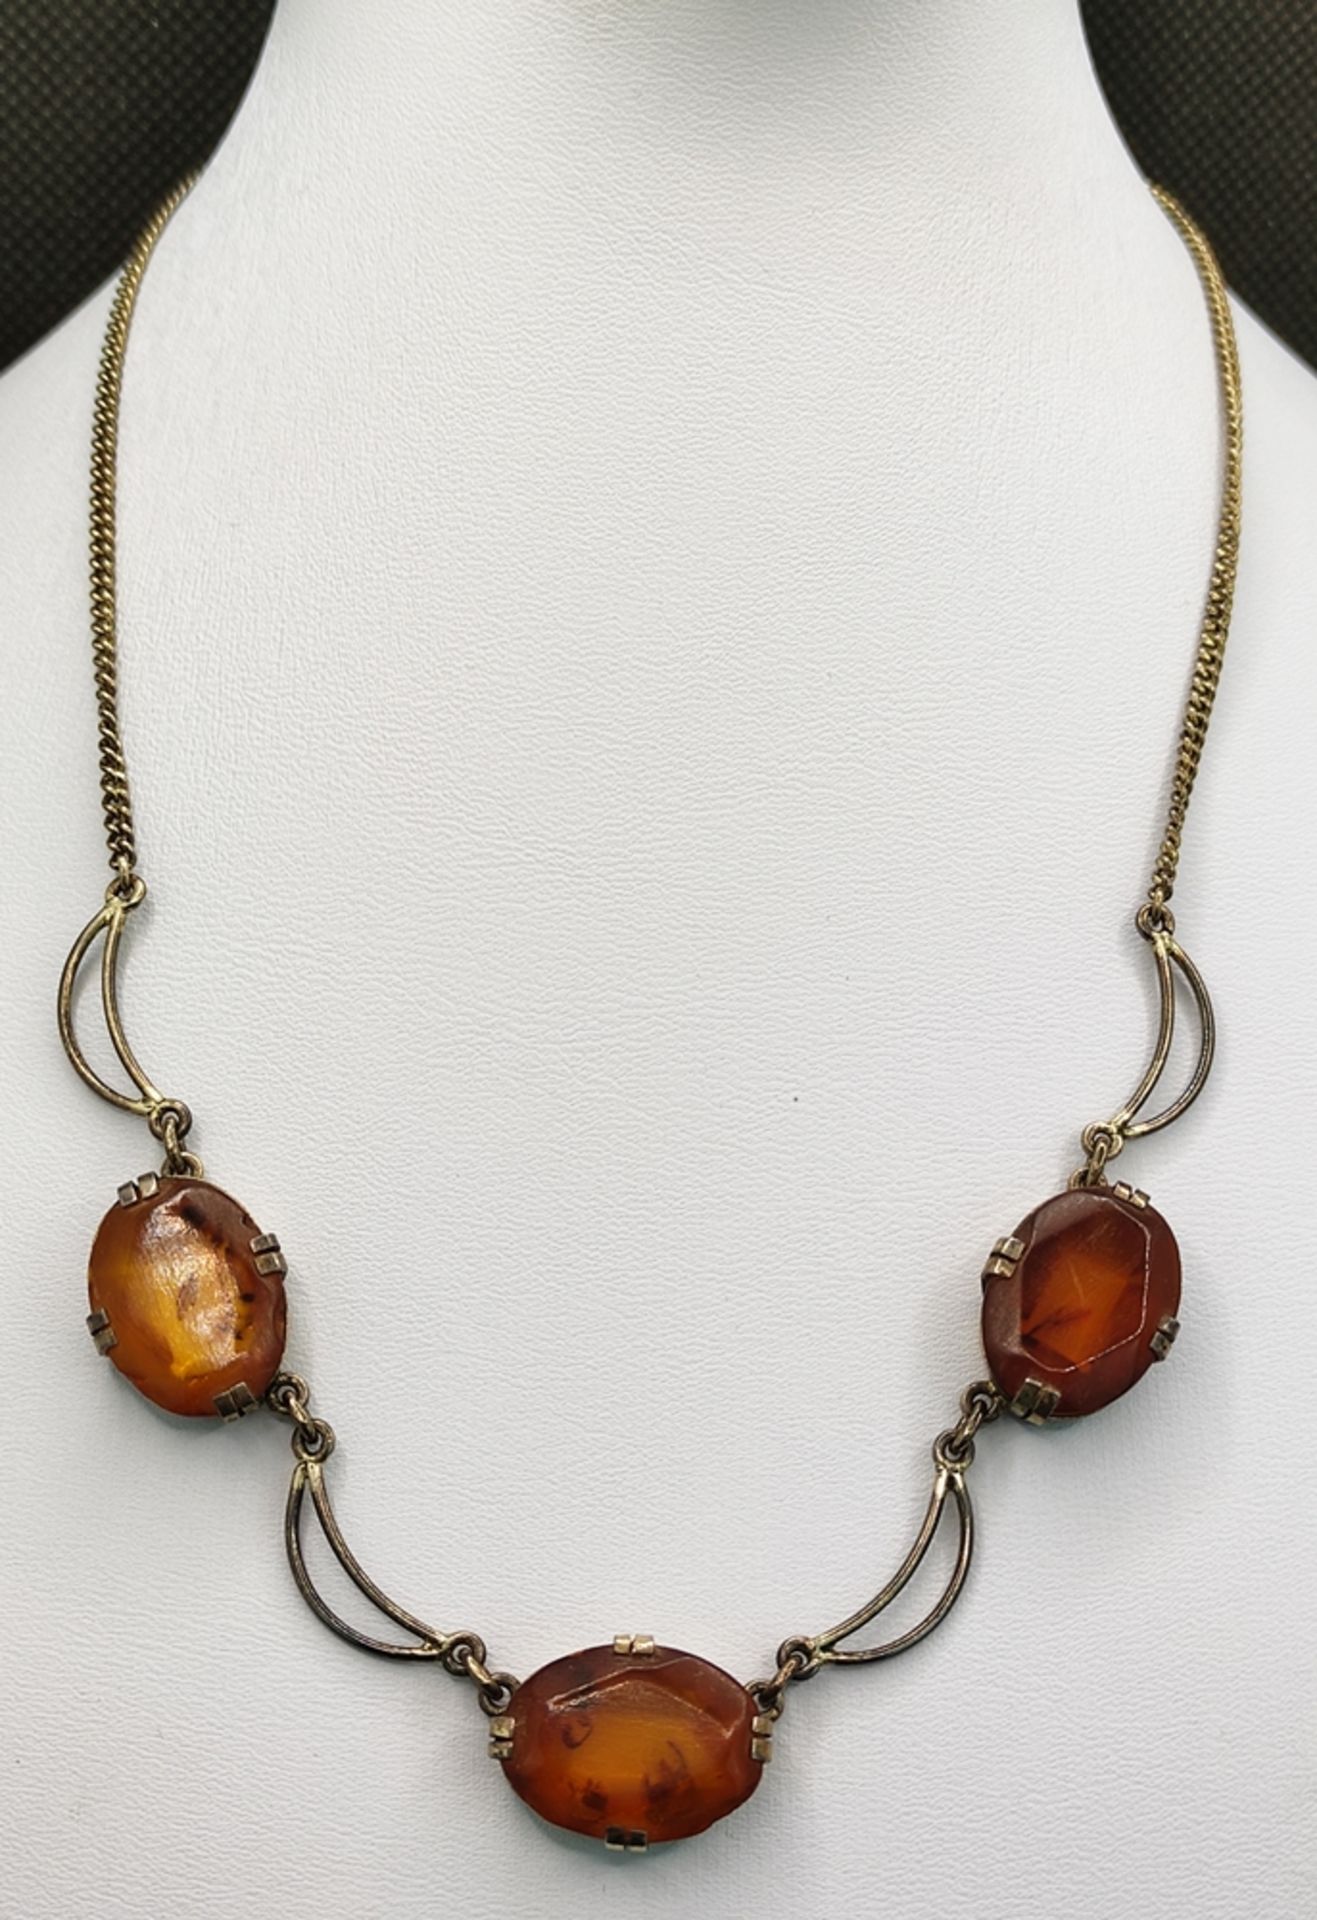 Amber necklace, with three oval amber stones, silver 925, goldsmith's signet "RR over a triangle", - Image 2 of 4